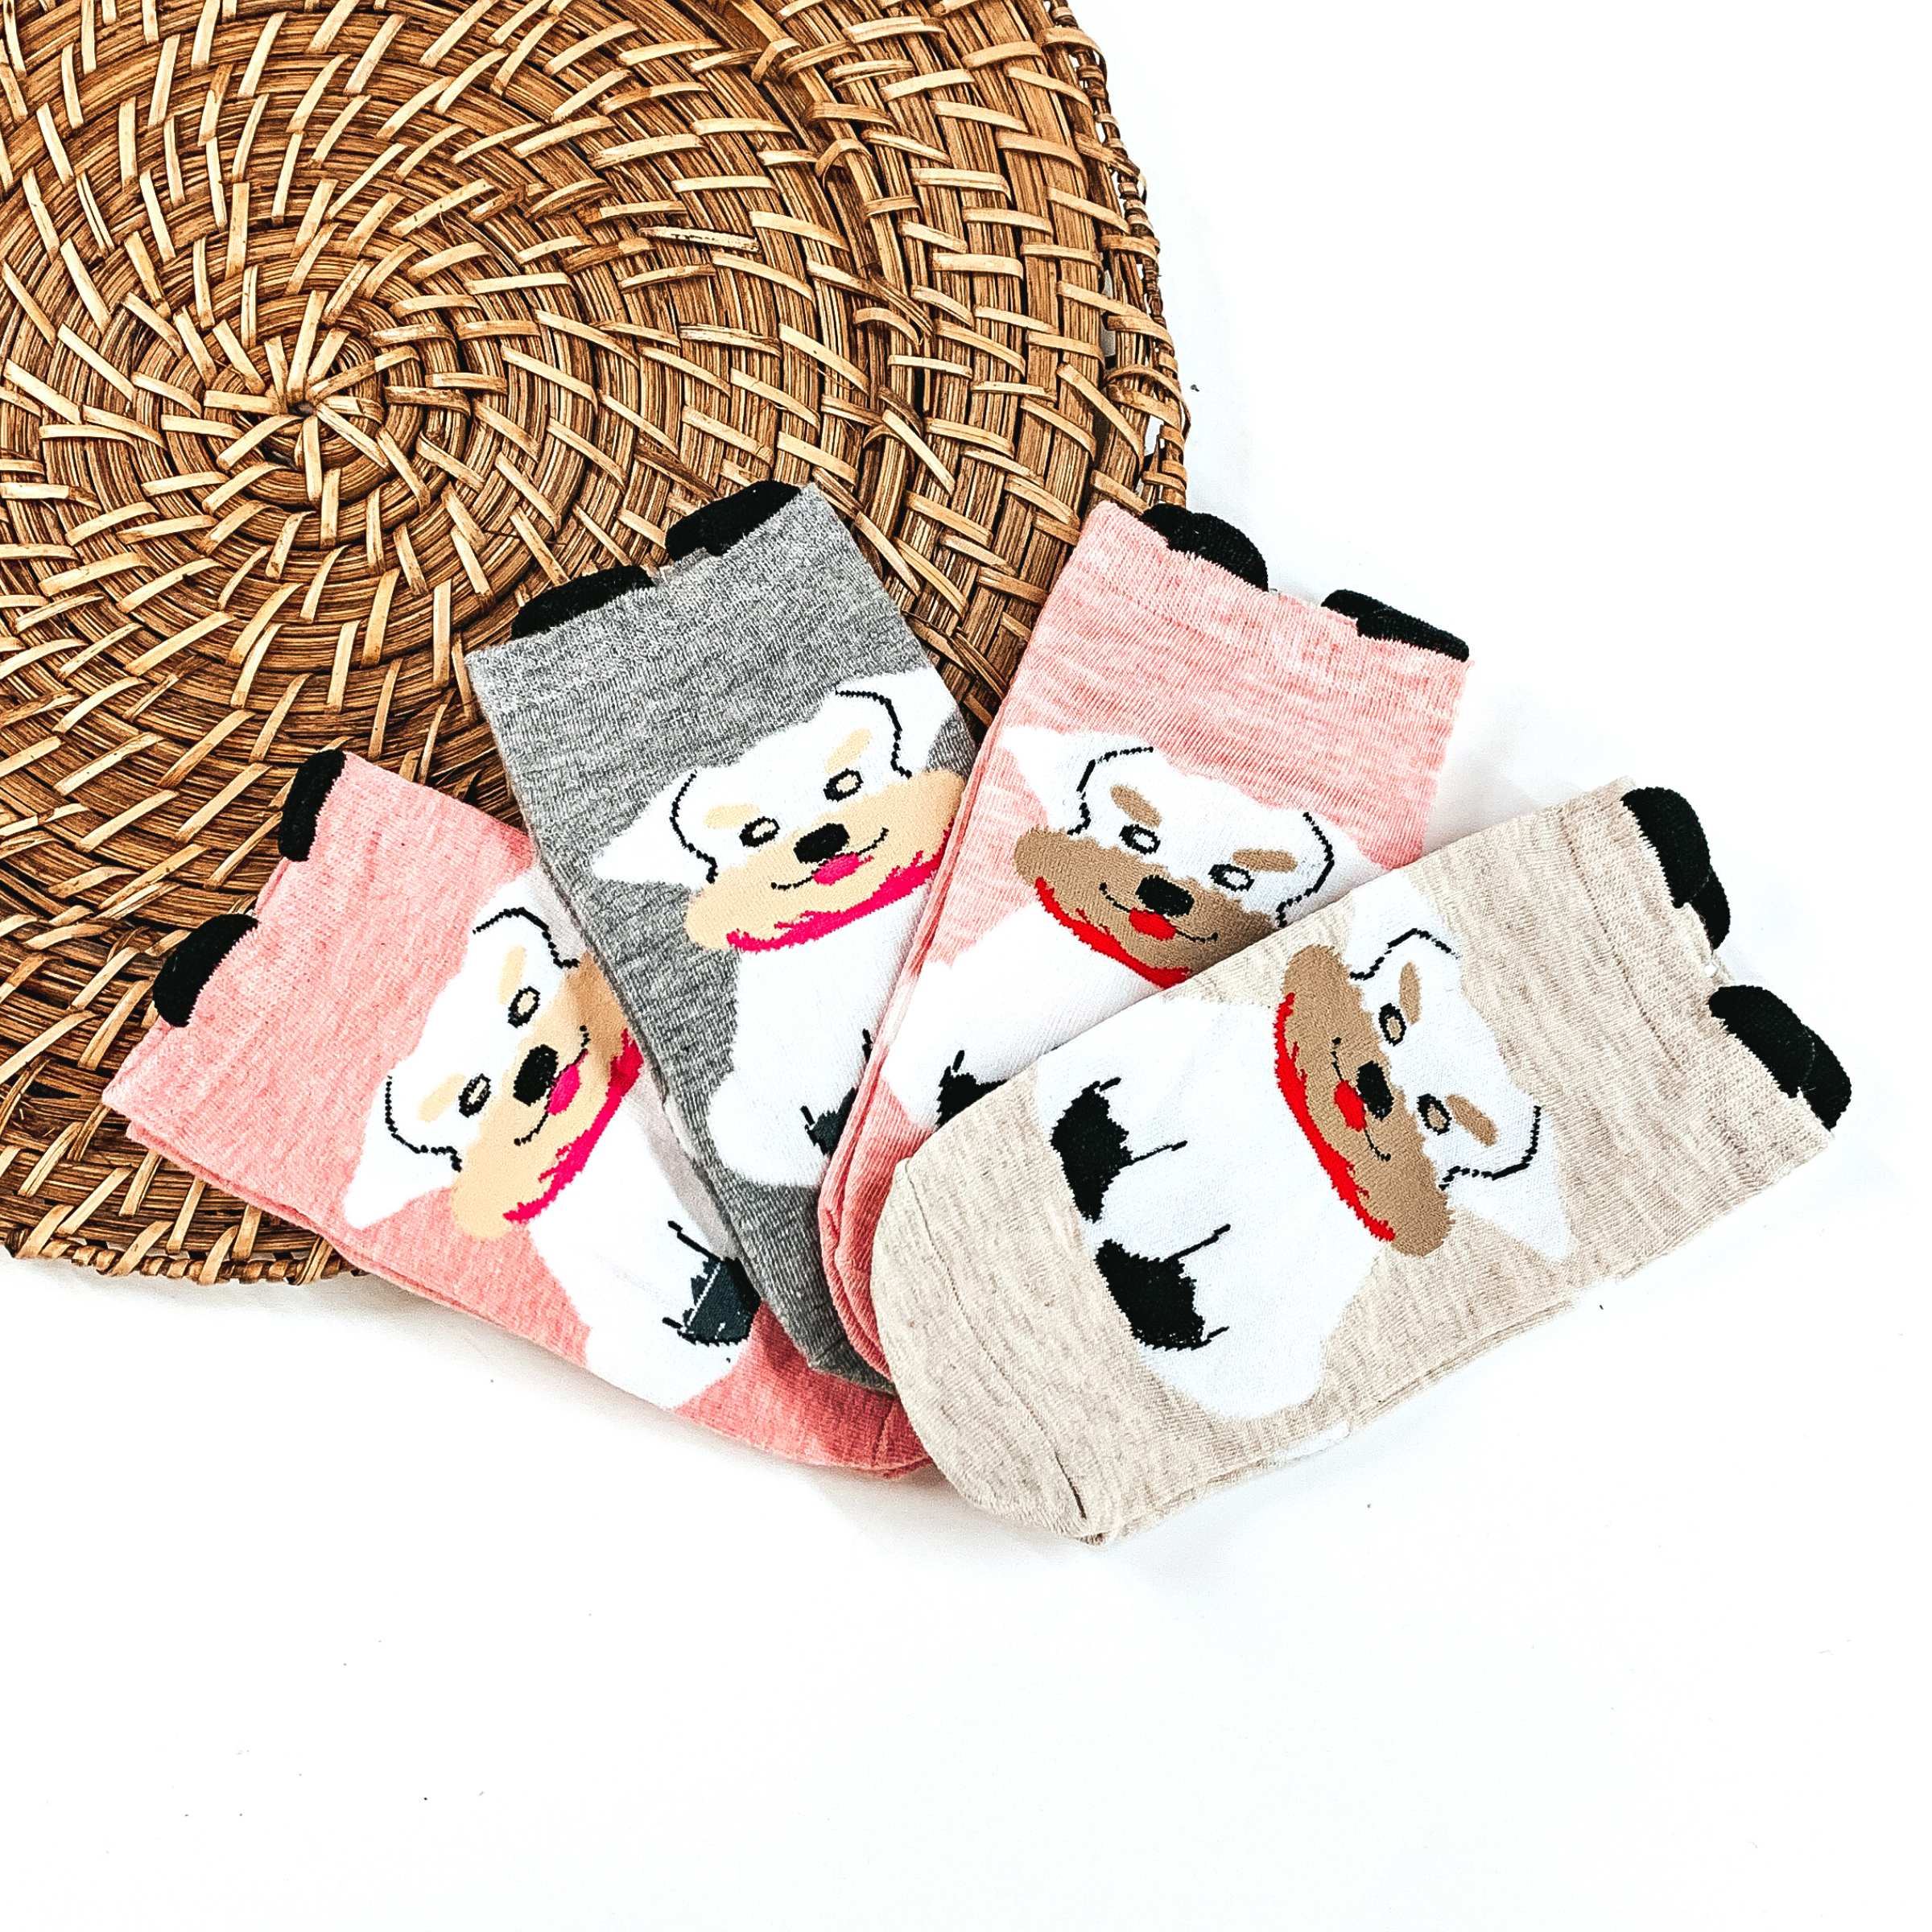 There are four pairs of socks in different colors with a Schnauzer dog in the center  and small black 'ears' on the top.  From left to right; light pink with white Schnauzer and pink scarf, grey with white  Schnauzer and pink scarf, light pink with white Schnazuer and red scarf, and the last one is beige with a white Schnauzer with a red scarf. These pairs of socks are taken  laying on a brown woven plate and on a white background.